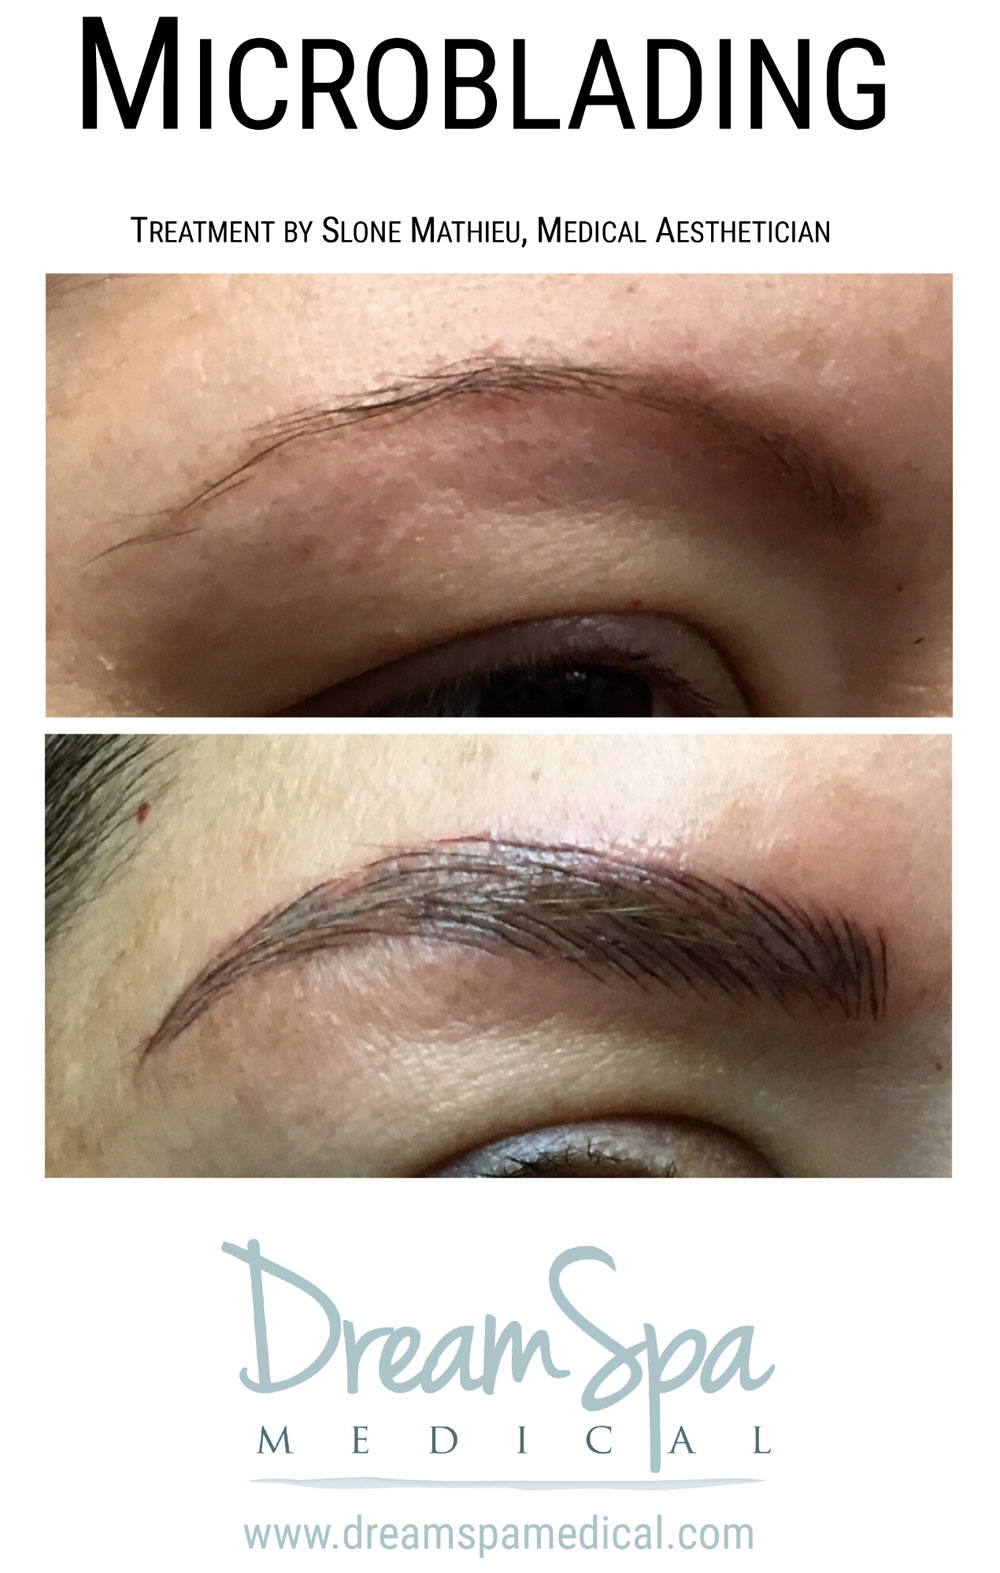 Dream Spa Medical Blog | Before and After Microblading Treatment by Slone Mathieu, Medical Aesthetician - Brookline MA